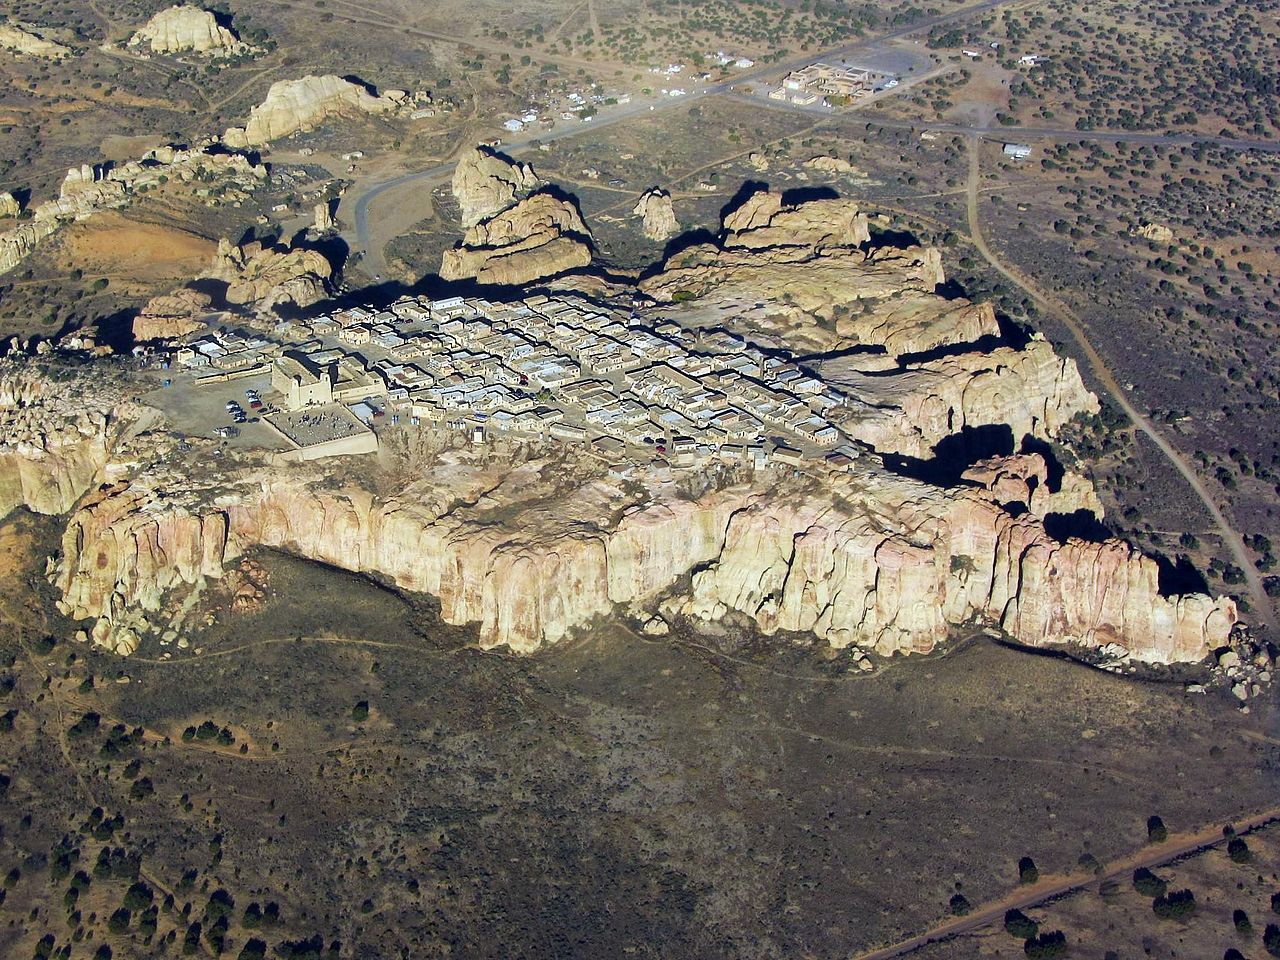 Aerial photo of Acoma Pueblo village on top of a prominent cliff.